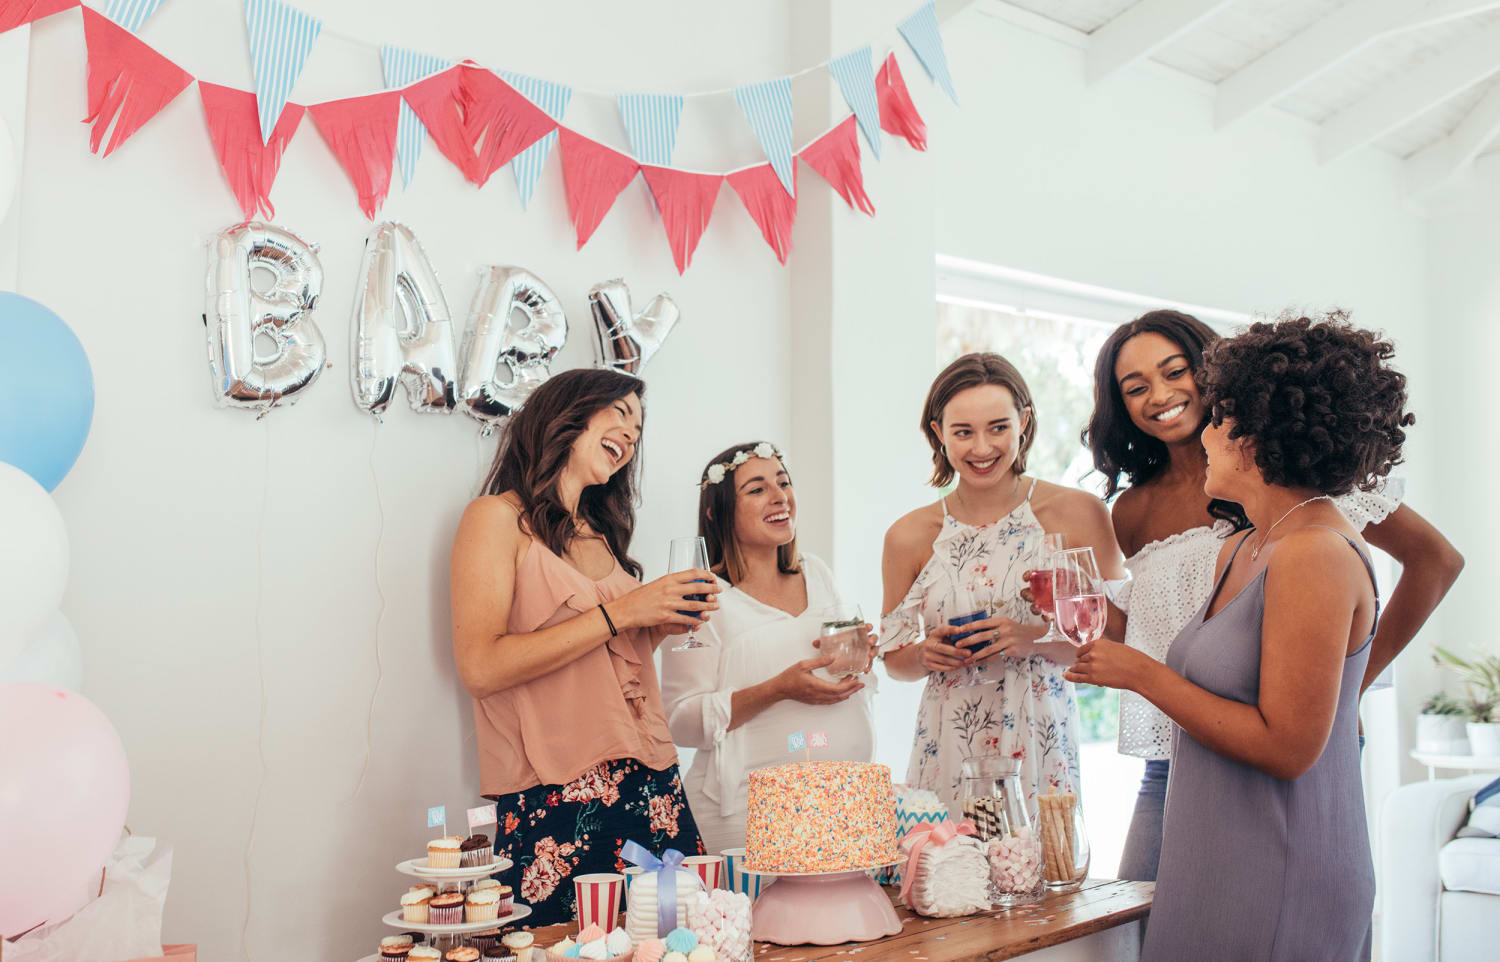 Start With an Eco-Friendly Baby Shower